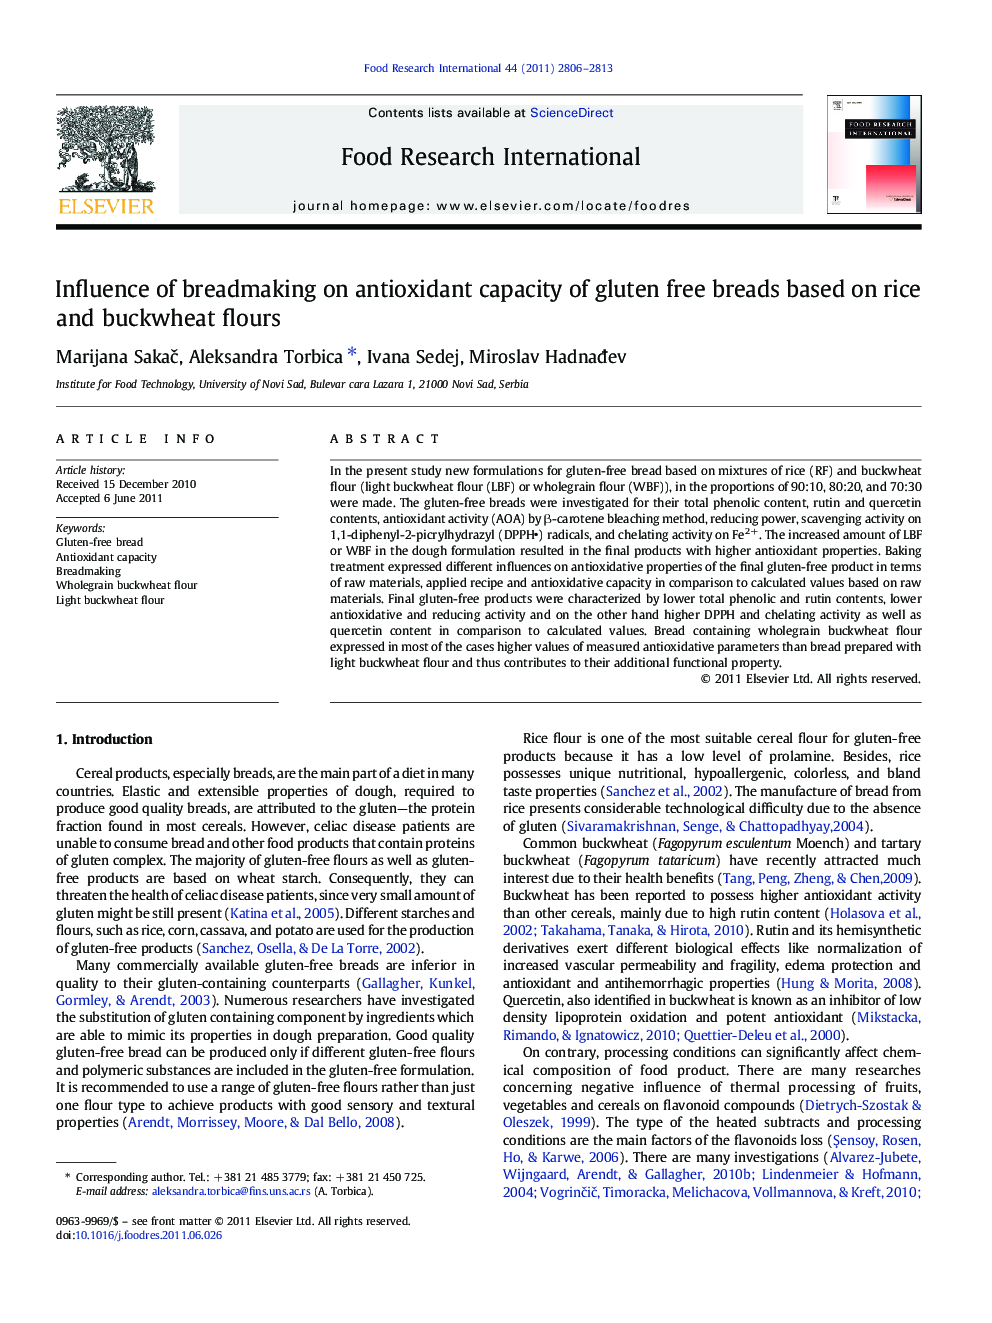 Influence of breadmaking on antioxidant capacity of gluten free breads based on rice and buckwheat flours